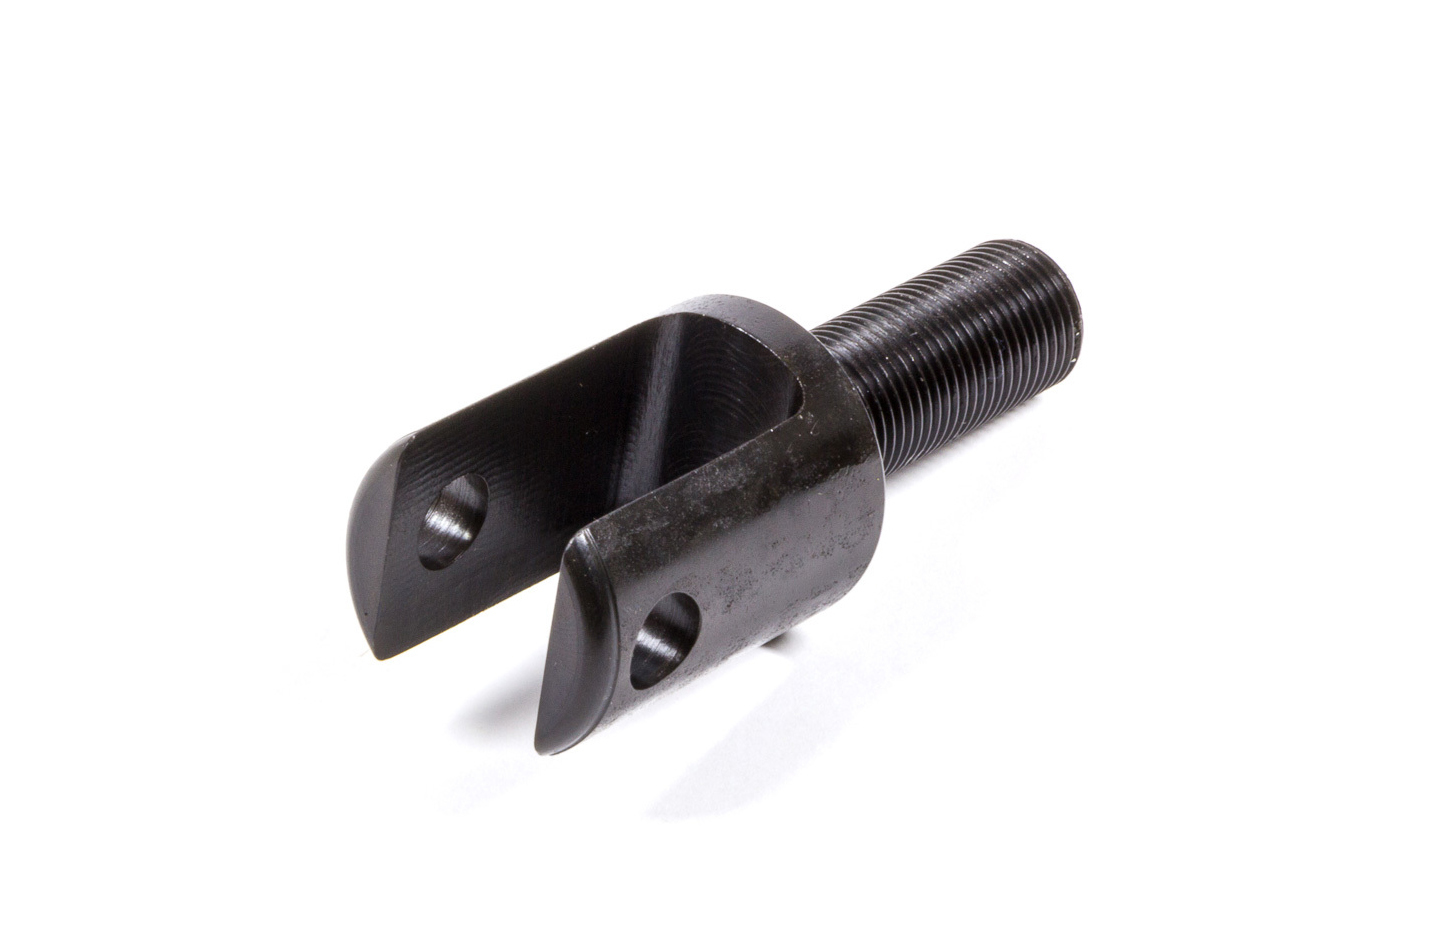 Sander Engineering S620-1 Rod End, Clevis, 1/2 in Bore, 5/8-18 in Right Hand Male Thread, Steel, Black Oxide, Each